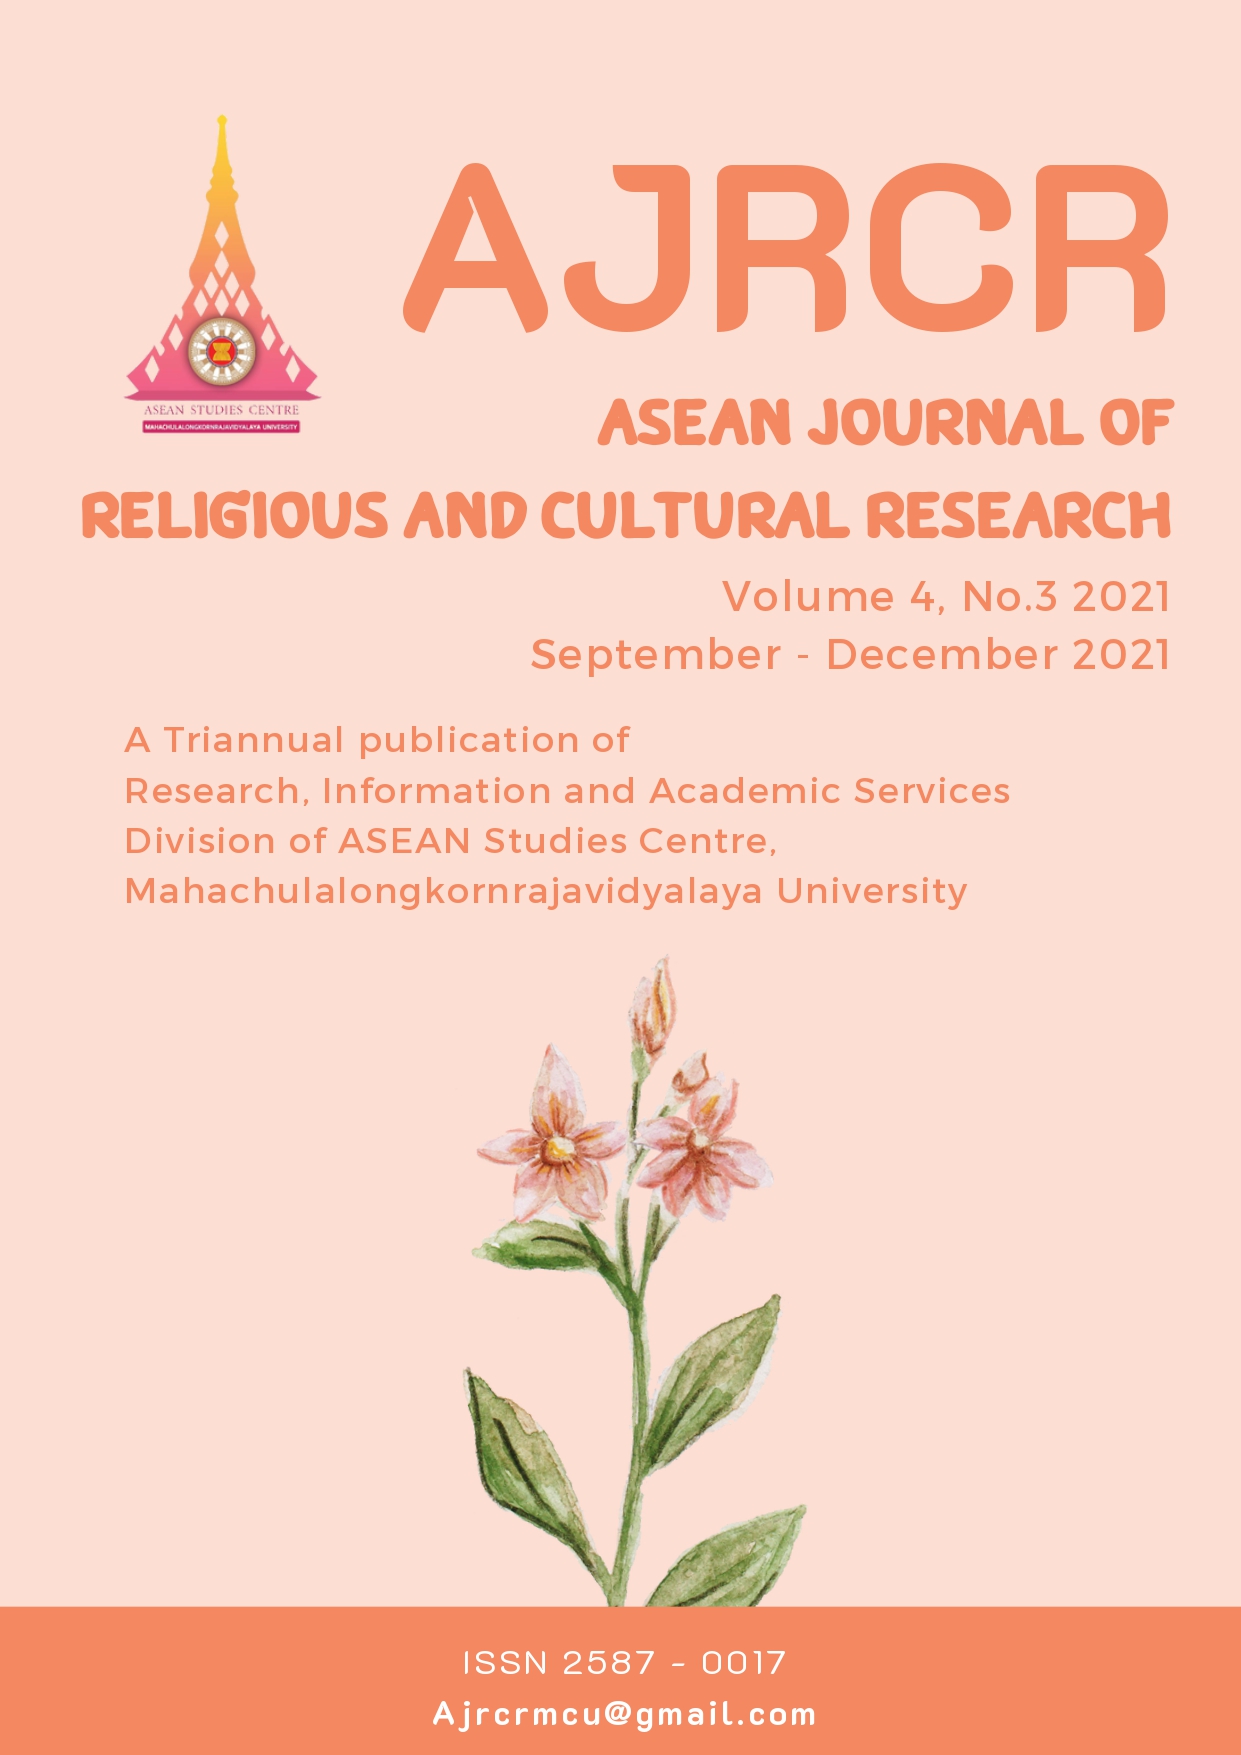 					View Vol. 4 No. 3 (2021): ASEAN Journal of Religious and Cultural Research (AJRCR)
				